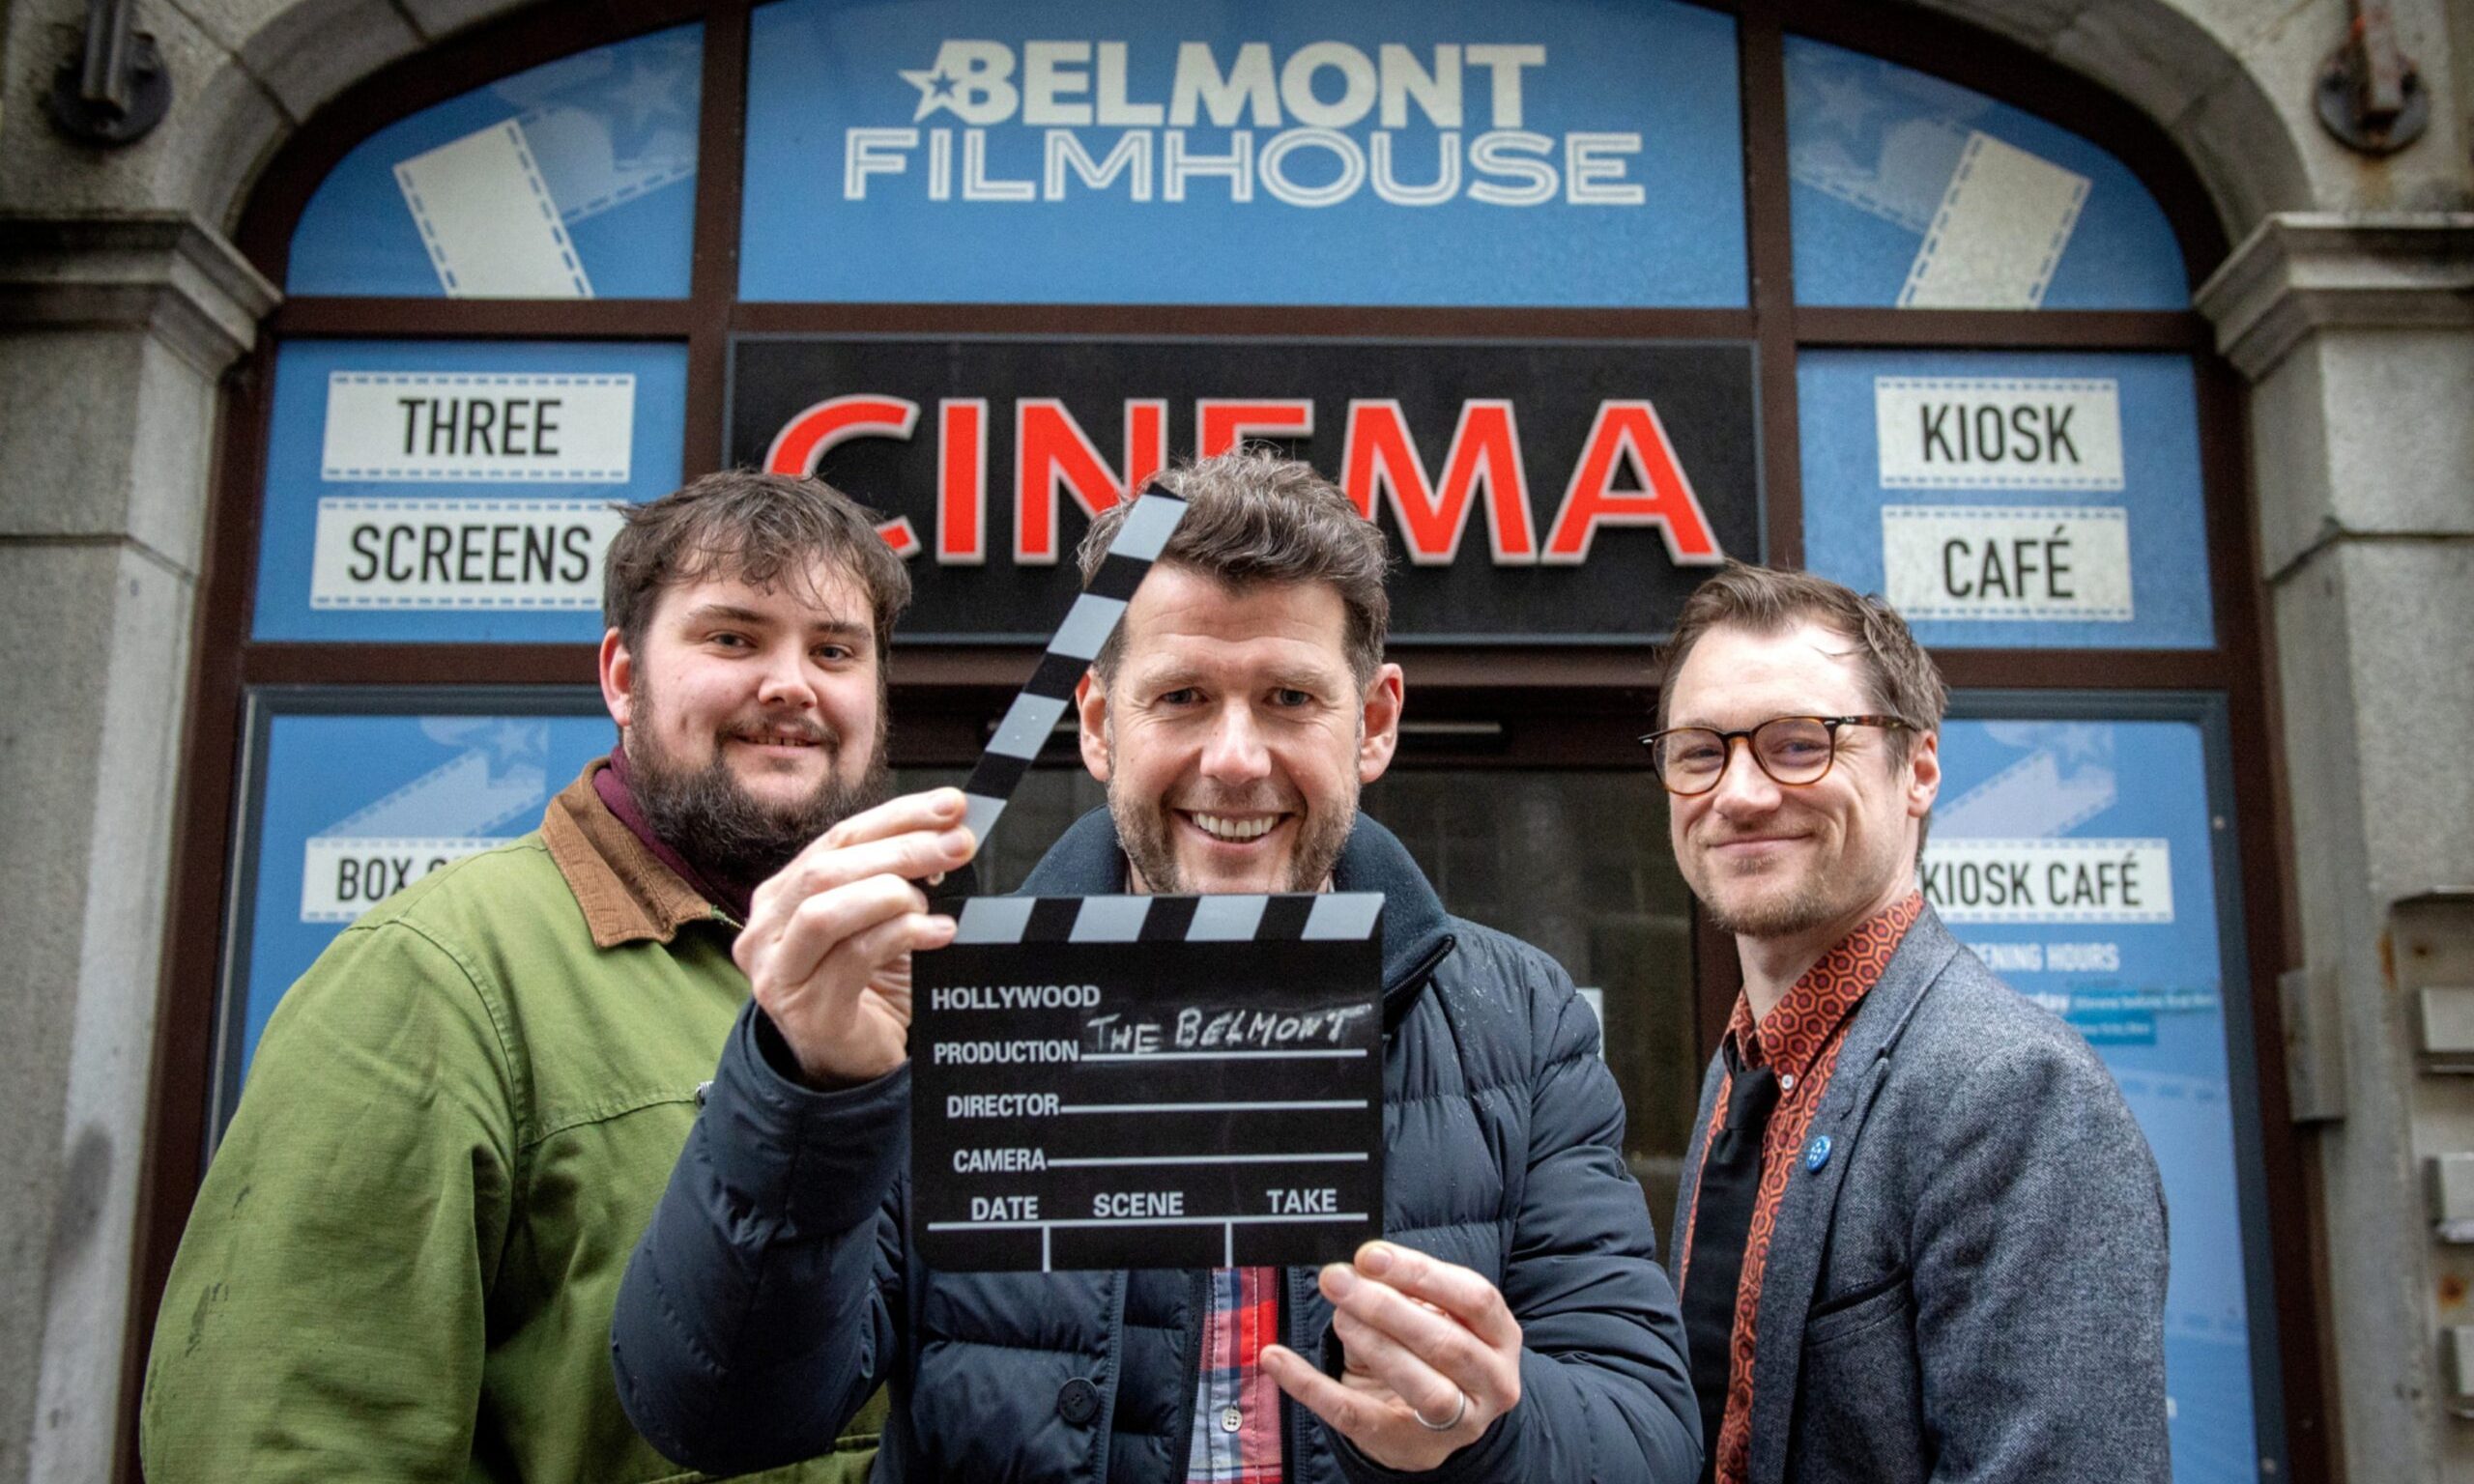 Belmont Cinema trustees Jacob Campbell and Dallas King, with architect Richard Tinto (middle) appointed to direct its revamp.